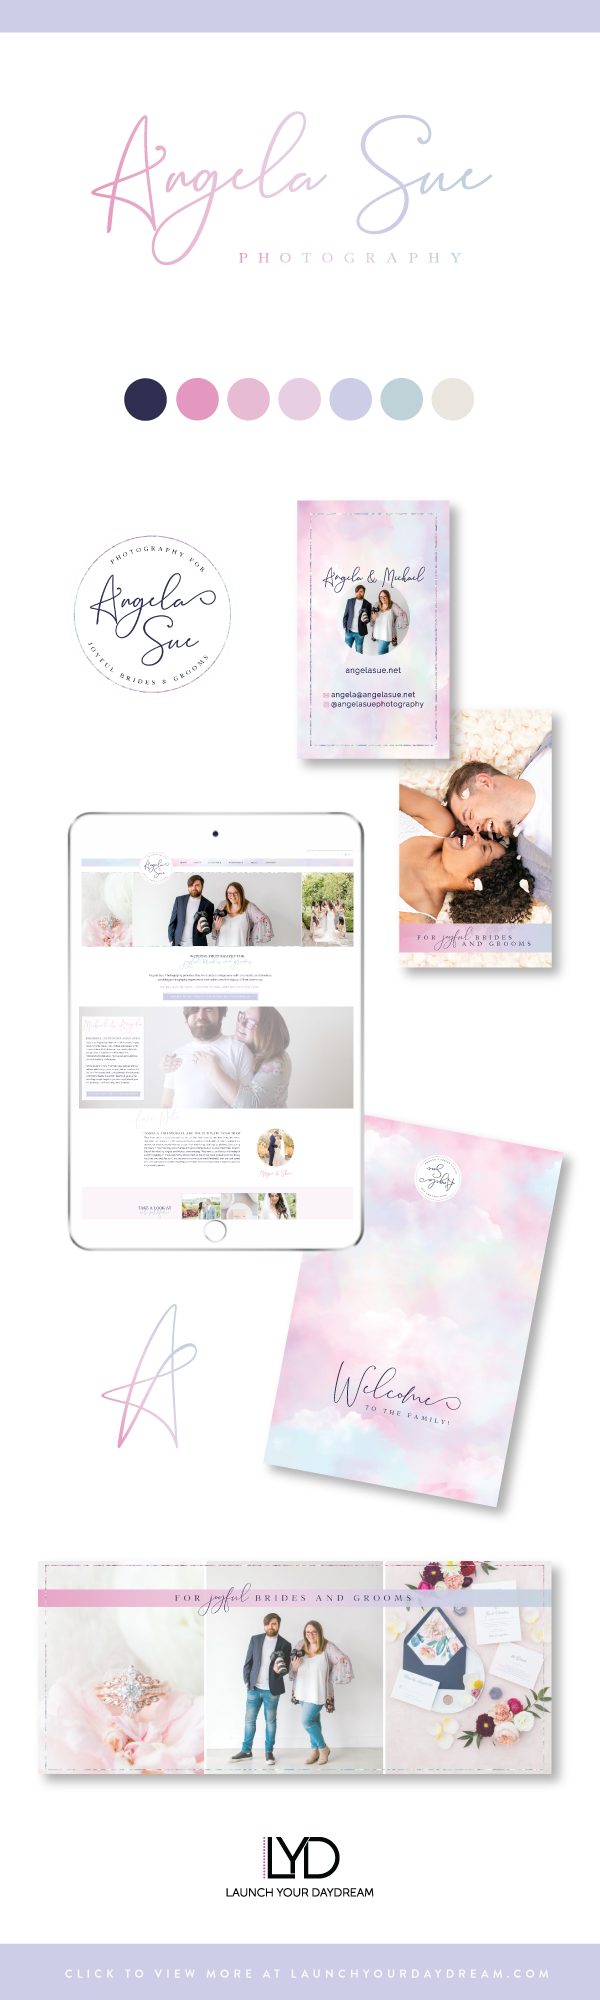 This is a romantic and colorful brand and Showit website design mockup for Angela Sue Photography in Bay Area, CA